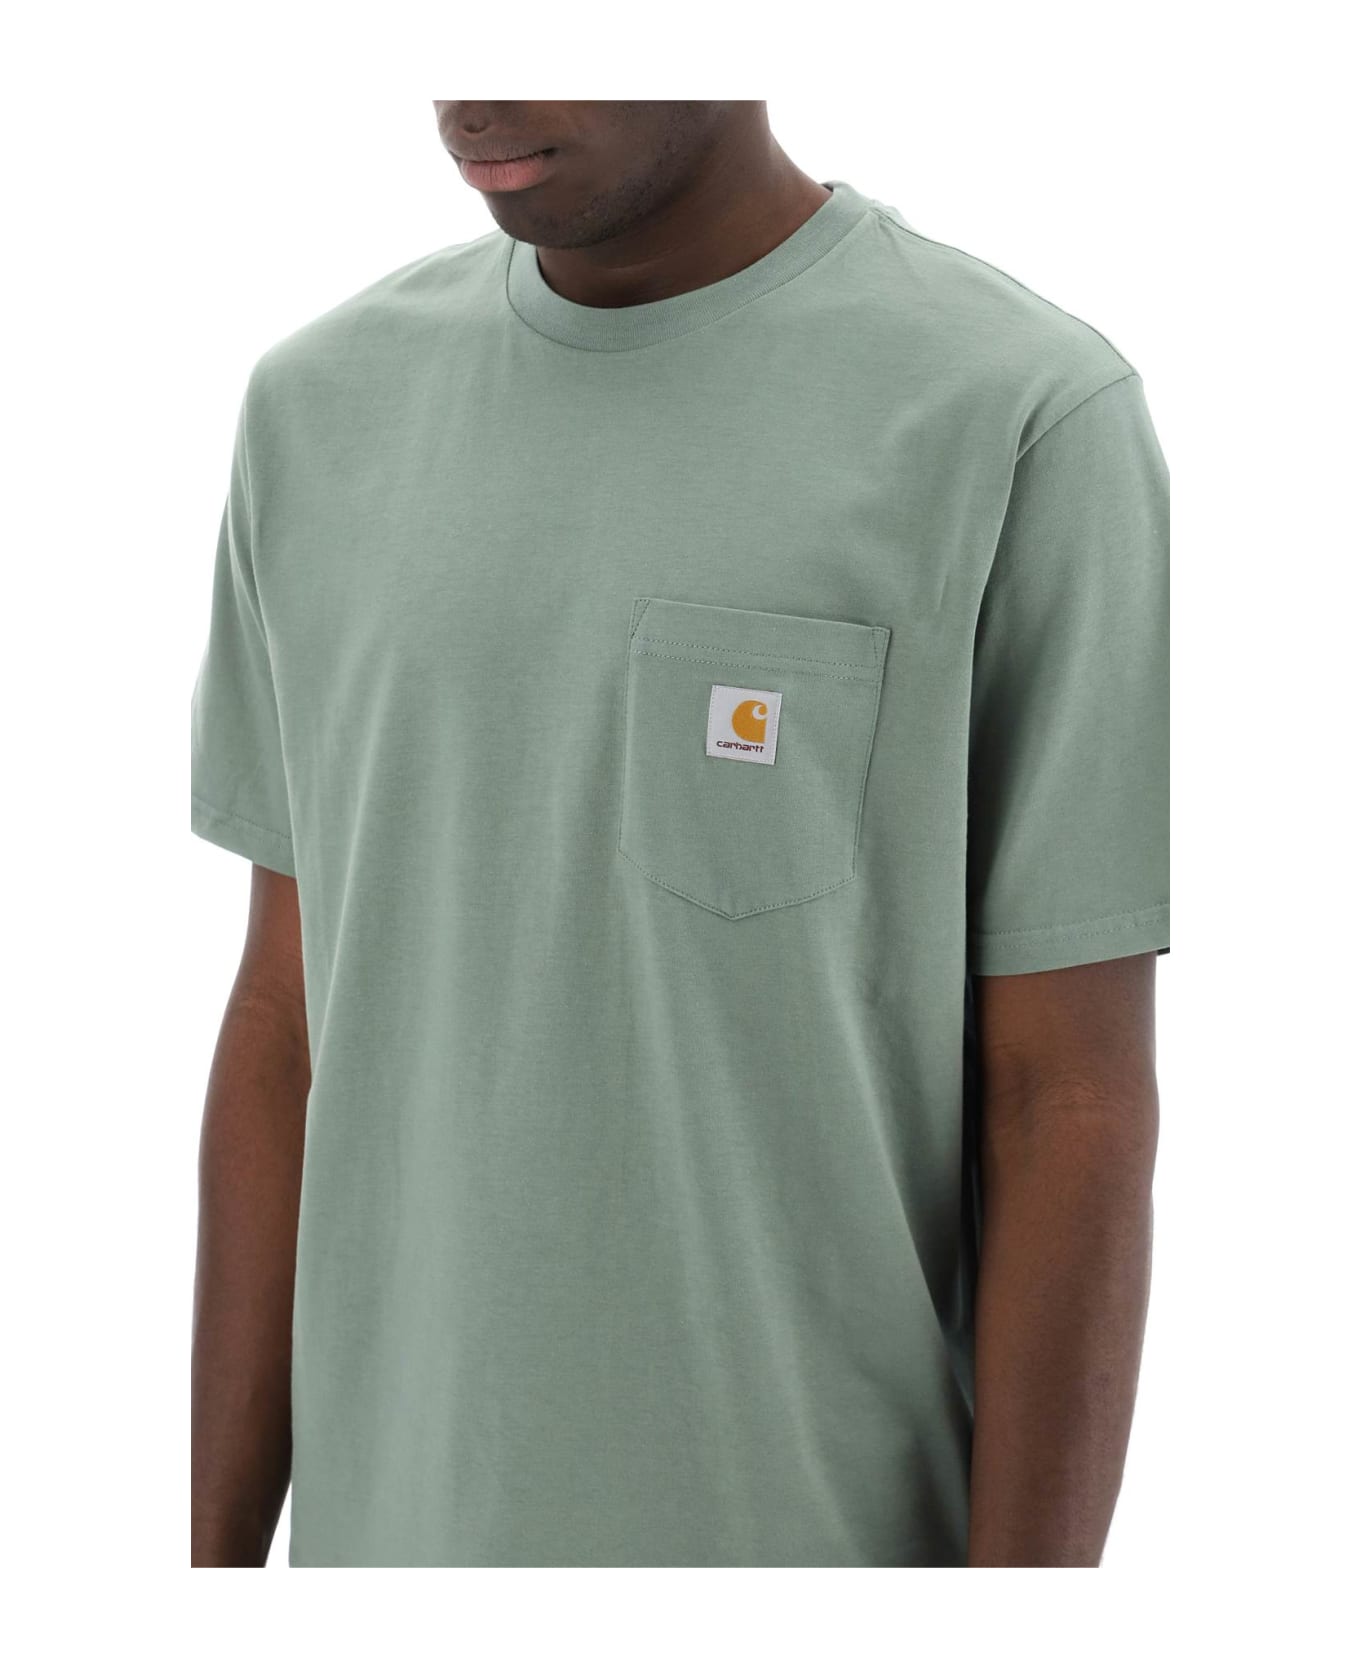 Carhartt T-shirt With Chest Pocket - Military シャツ